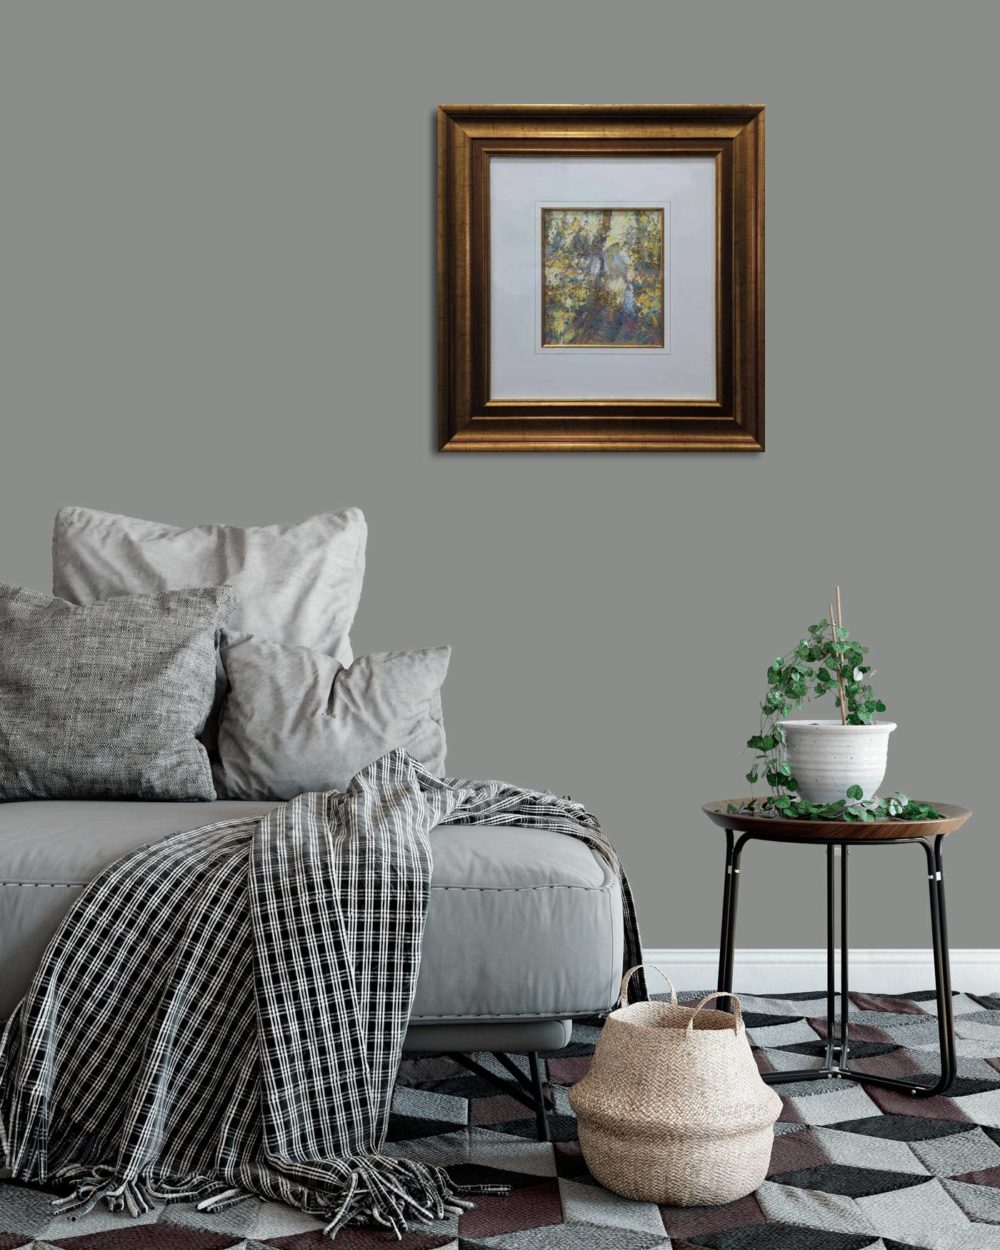 The Lady In The Garden In Gold Frame In Room